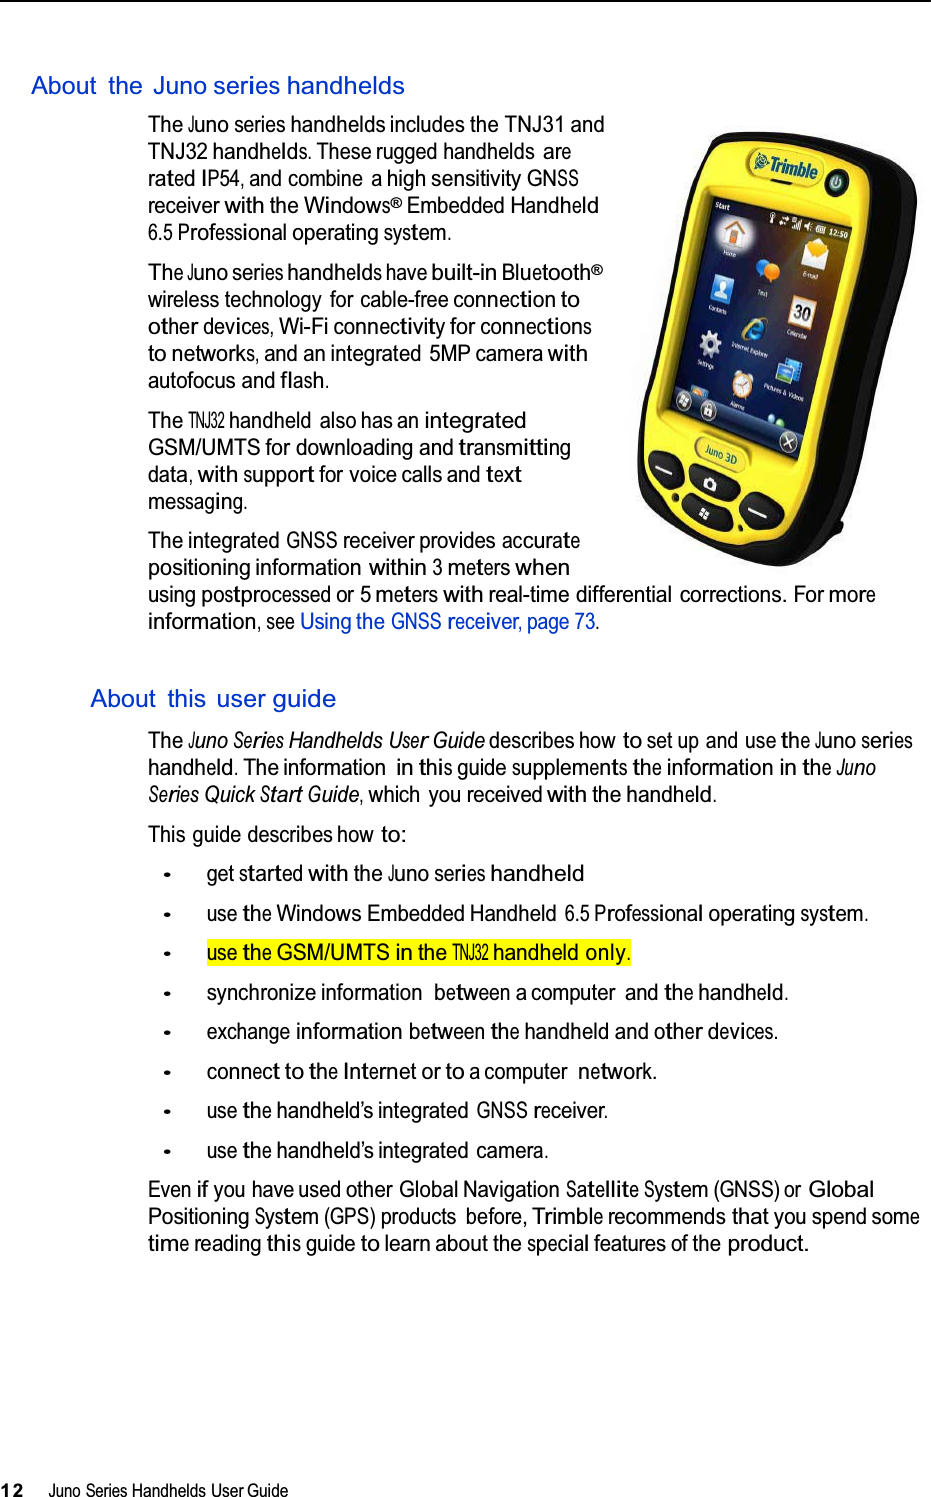   About the Juno serieshandhelds TheJunoserieshandhelds includes the TNJ31 andTNJ32handhelds.These rugged handheldsareratedIP54,and combine ahigh sensitivityGNSSreceiverwiththeWindows®EmbeddedHandheld6.5Professionaloperatingsystem. TheJunoserieshandheldshavebuilt-inBluetooth® wireless technology for cable-freeconnectiontootherdevices,Wi-Ficonnectivityforconnectionstonetworks,and an integrated 5MP camerawith autofocus andflash. TheTNJ32handheld also has anintegrated GSM/UMTS for downloading andtransmittingdata,withsupportfor voice calls andtext messaging. The integratedGNSSreceiver providesaccuratepositioning informationwithin3meterswhenusingpostprocessedor 5meterswithreal-time differential corrections. Formoreinformation,seeUsing theGNSSreceiver,page73.  About this user guide TheJunoSeriesHandheldsUserGuide describes howtoset up and usetheJunoserieshandheld.The informationinthisguidesupplementstheinformationintheJunoSeriesQuickStartGuide,which you receivedwiththe handheld. This guide describes howto: •getstartedwiththeJunoserieshandheld •usetheWindowsEmbedded Handheld6.5 Professionaloperatingsystem. •usetheGSM/UMTSintheTNJ32handheldonly. •synchronize informationbetweena computer and thehandheld. •exchangeinformationbetweenthehandheld and otherdevices. •connecttotheInternetortoa computernetwork. •usethehandheld’s integratedGNSSreceiver. •usethehandheld’s integrated camera. Evenifyou have usedother Global NavigationSatelliteSystem(GNSS) orGlobal PositioningSystem(GPS)products before,Trimblerecommendsthatyou spend sometimereadingthisguidetolearn about thespecialfeatures of theproduct.           12Juno SeriesHandhelds User Guide